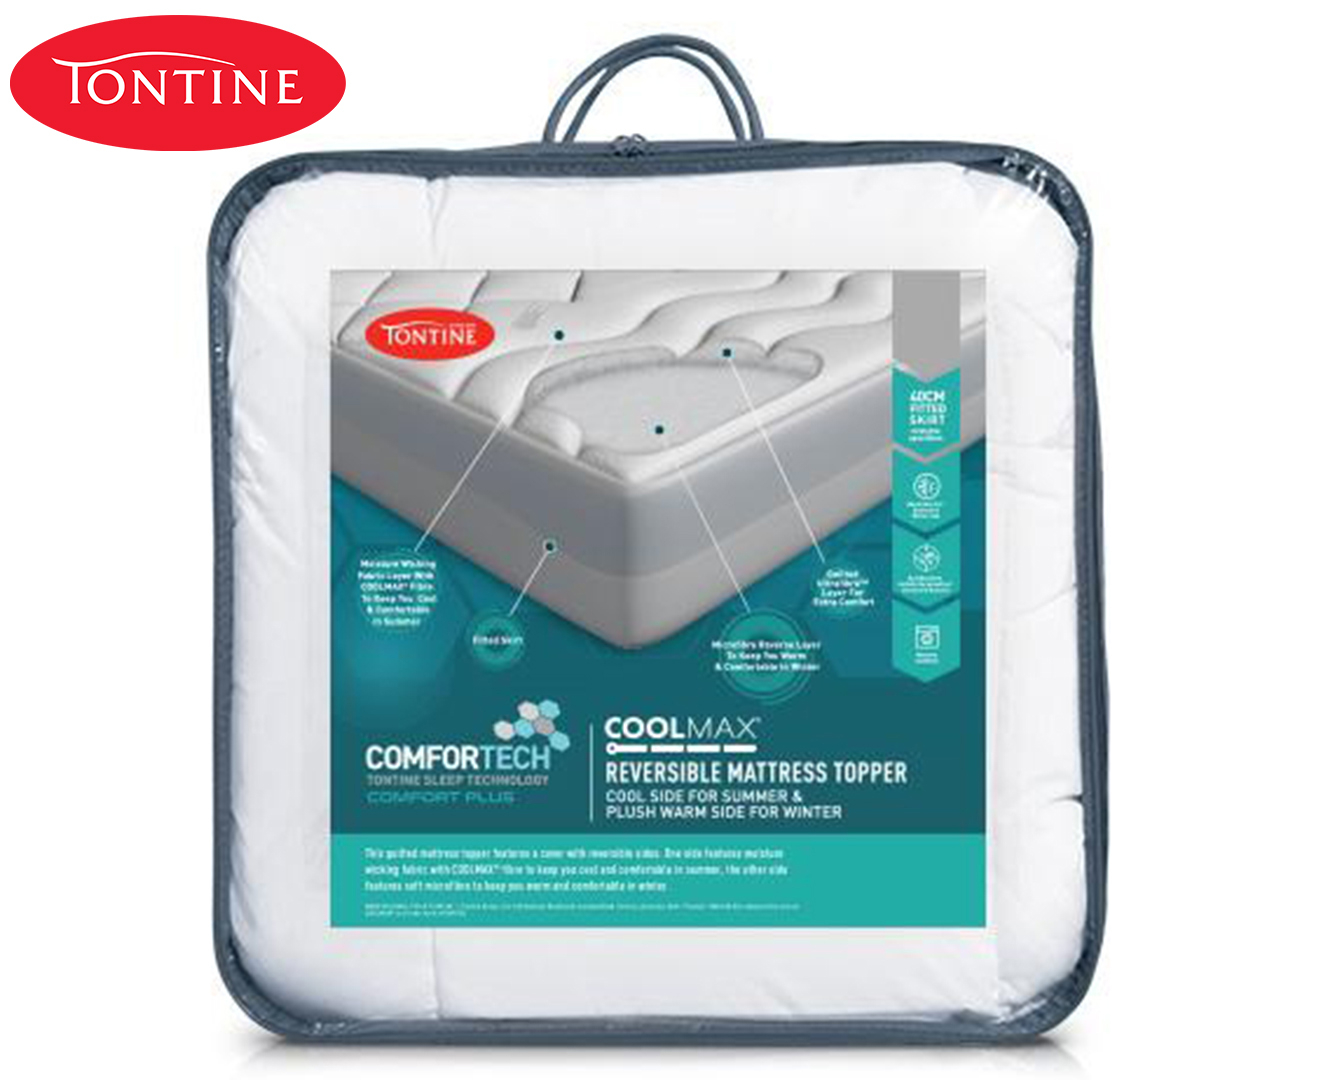 tontine comfortech quilted waterproof mattress protector review